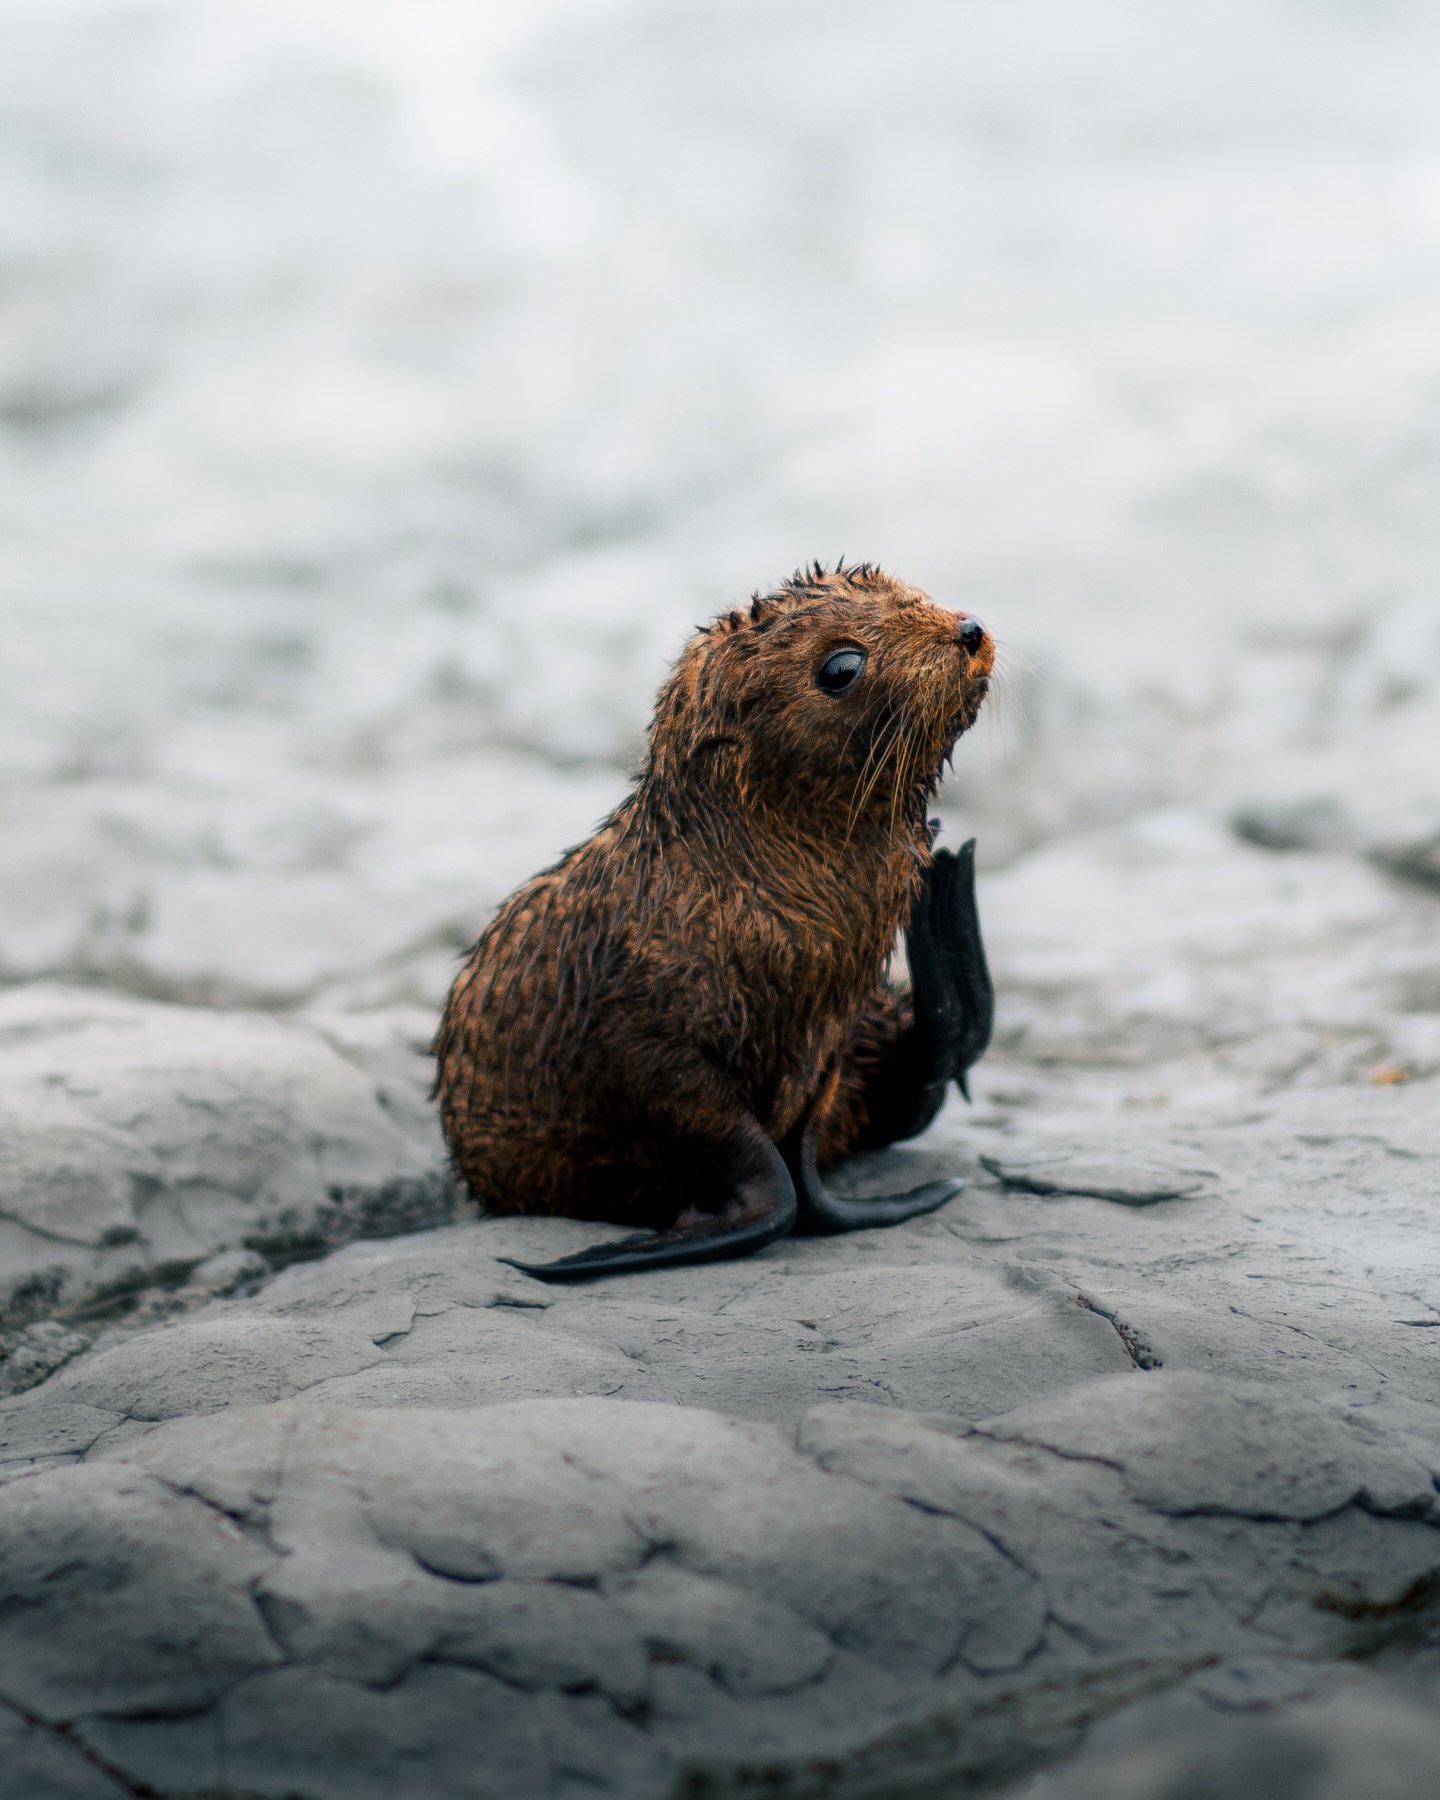 On one of our last days in New Zealand, we went to Kaikoura and had one of the most heartwarming encounters! There were so many seals on the beach, and we even found a baby seal playing around on the rocks.
&mdash;
#newzealandvacations #folkgood #ear